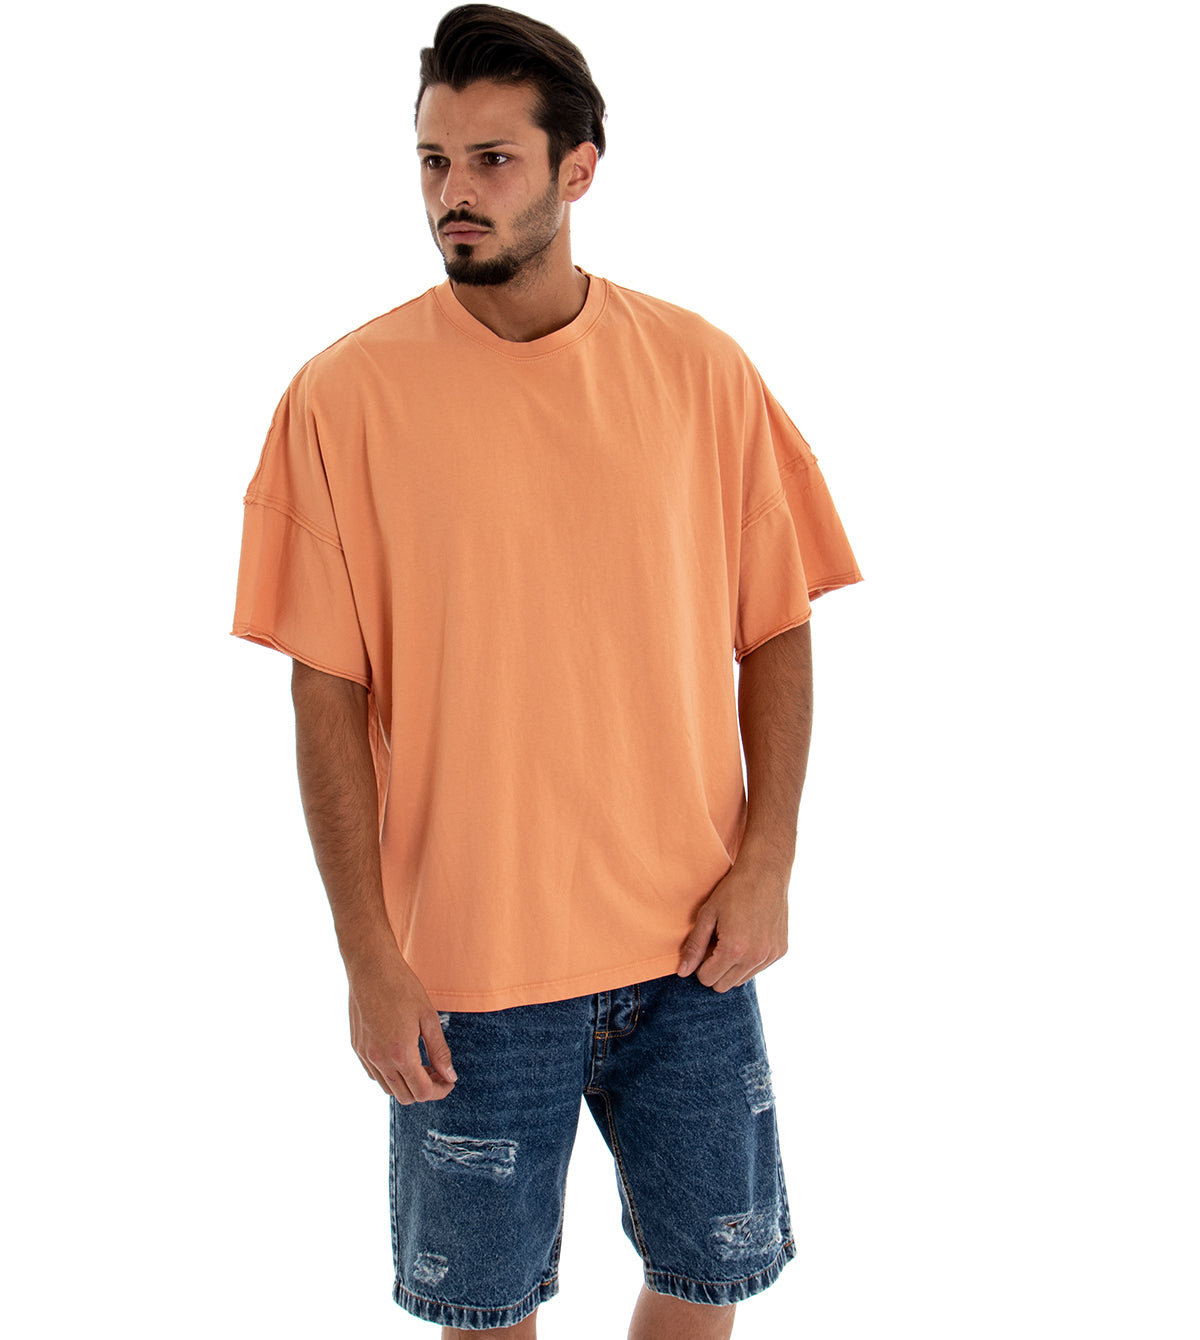 Men's T-shirt Solid Color Over Salmon Round Neck Cotton GIOSAL